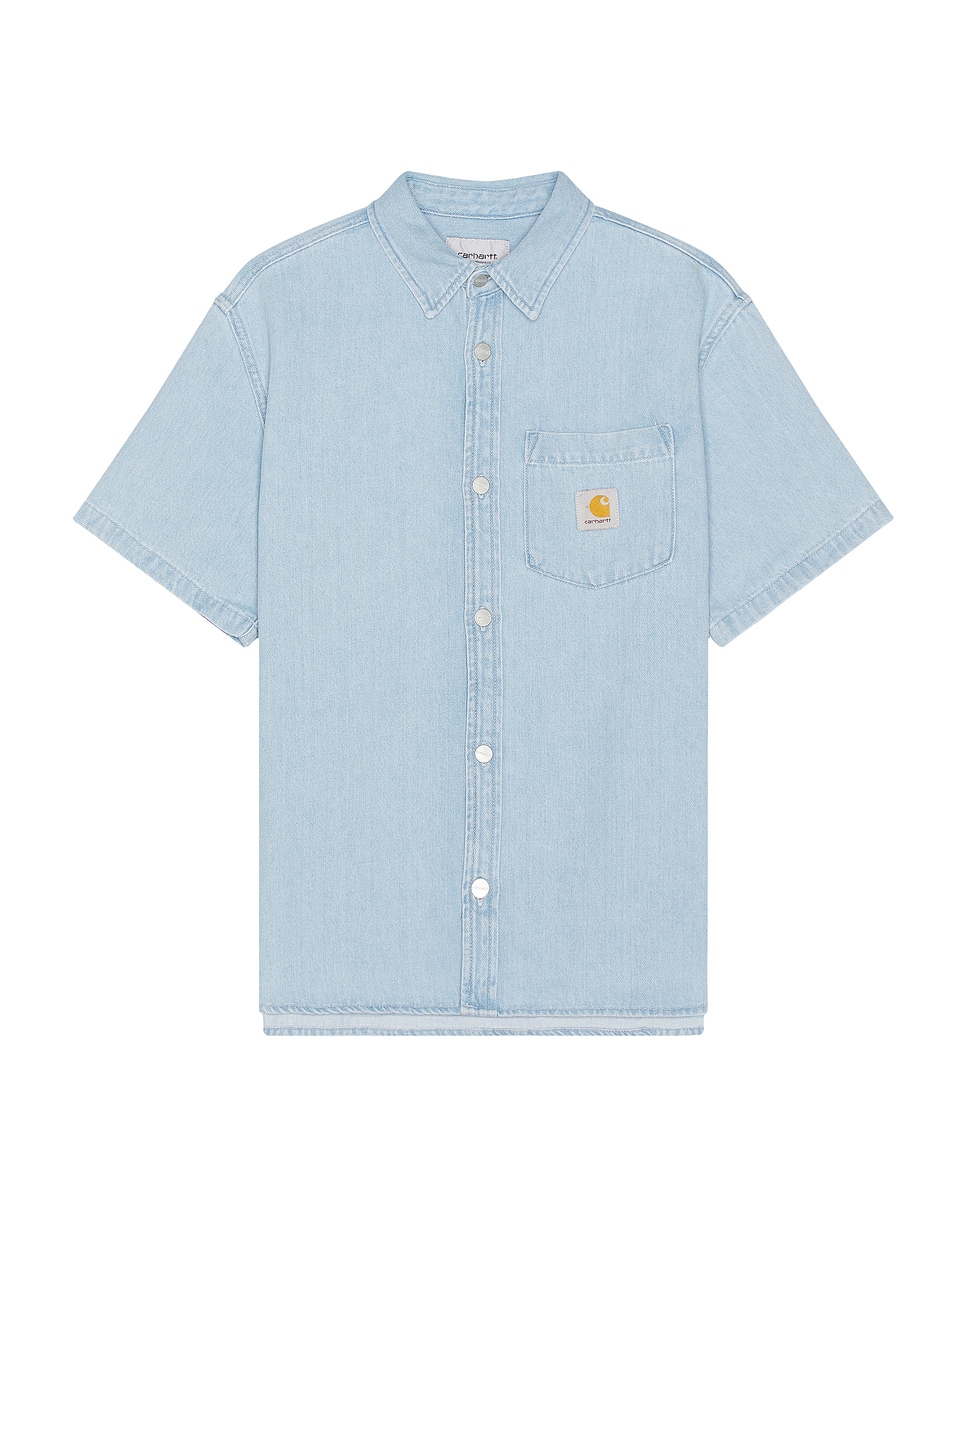 Image 1 of Carhartt WIP Short Sleeve Ody Shirt in Blue Stone Bleached